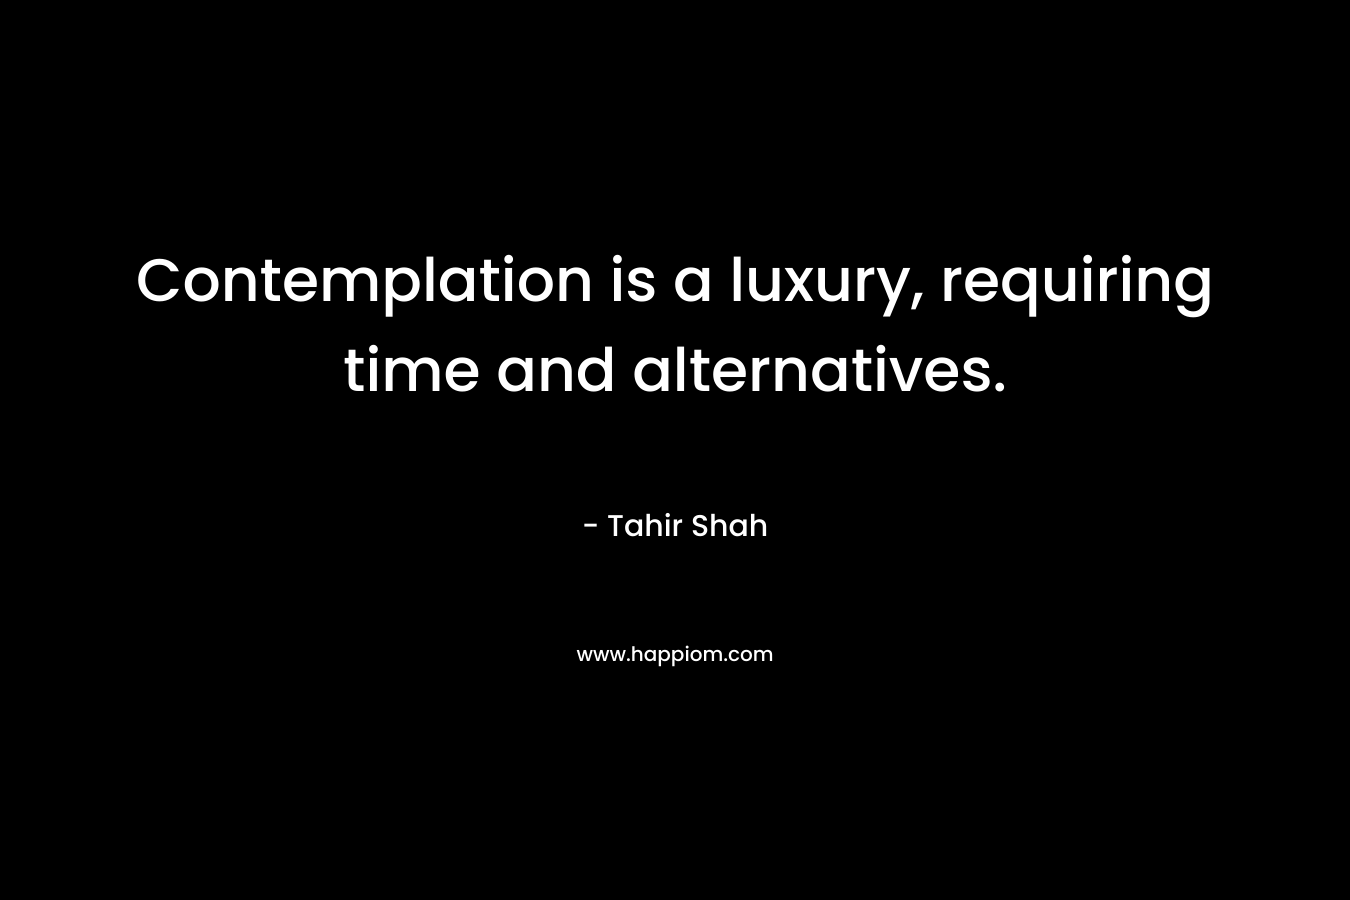 Contemplation is a luxury, requiring time and alternatives. – Tahir Shah